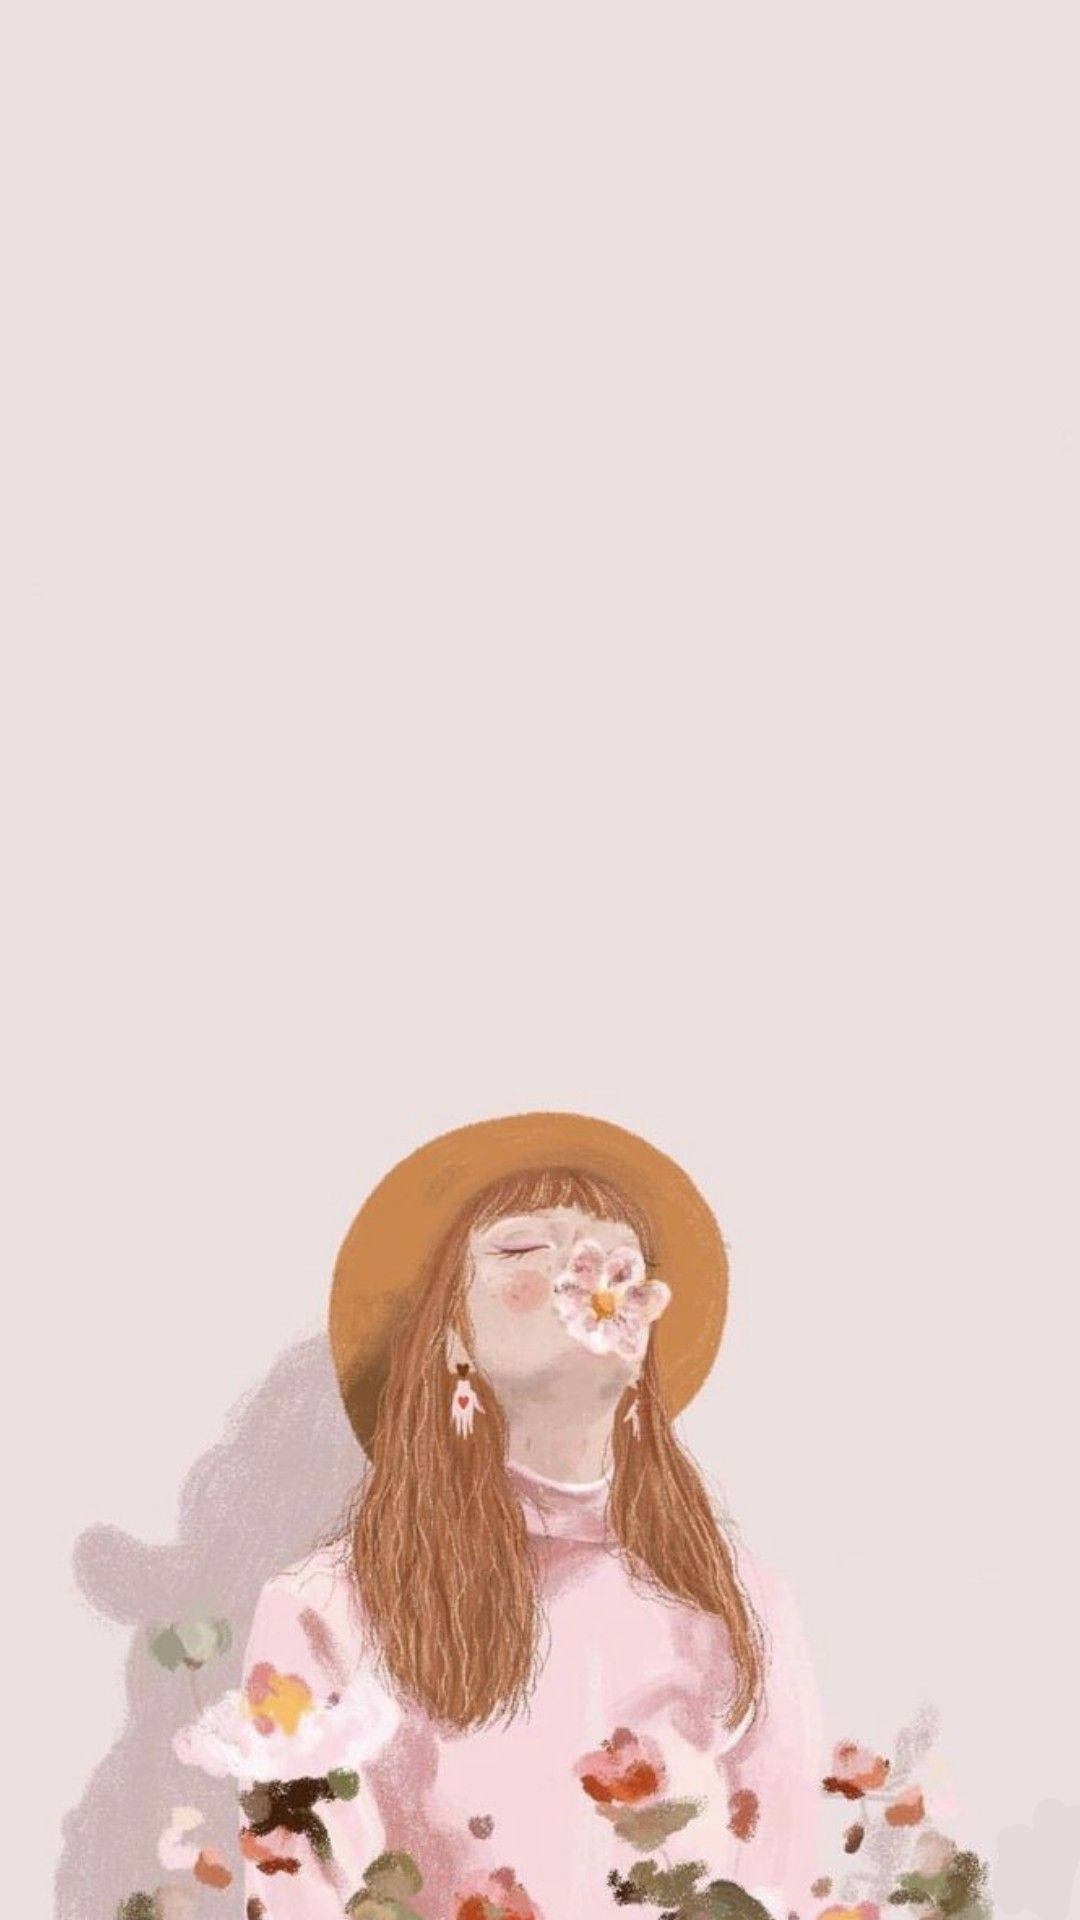 Captivating Pink Aesthetic Girl Painting